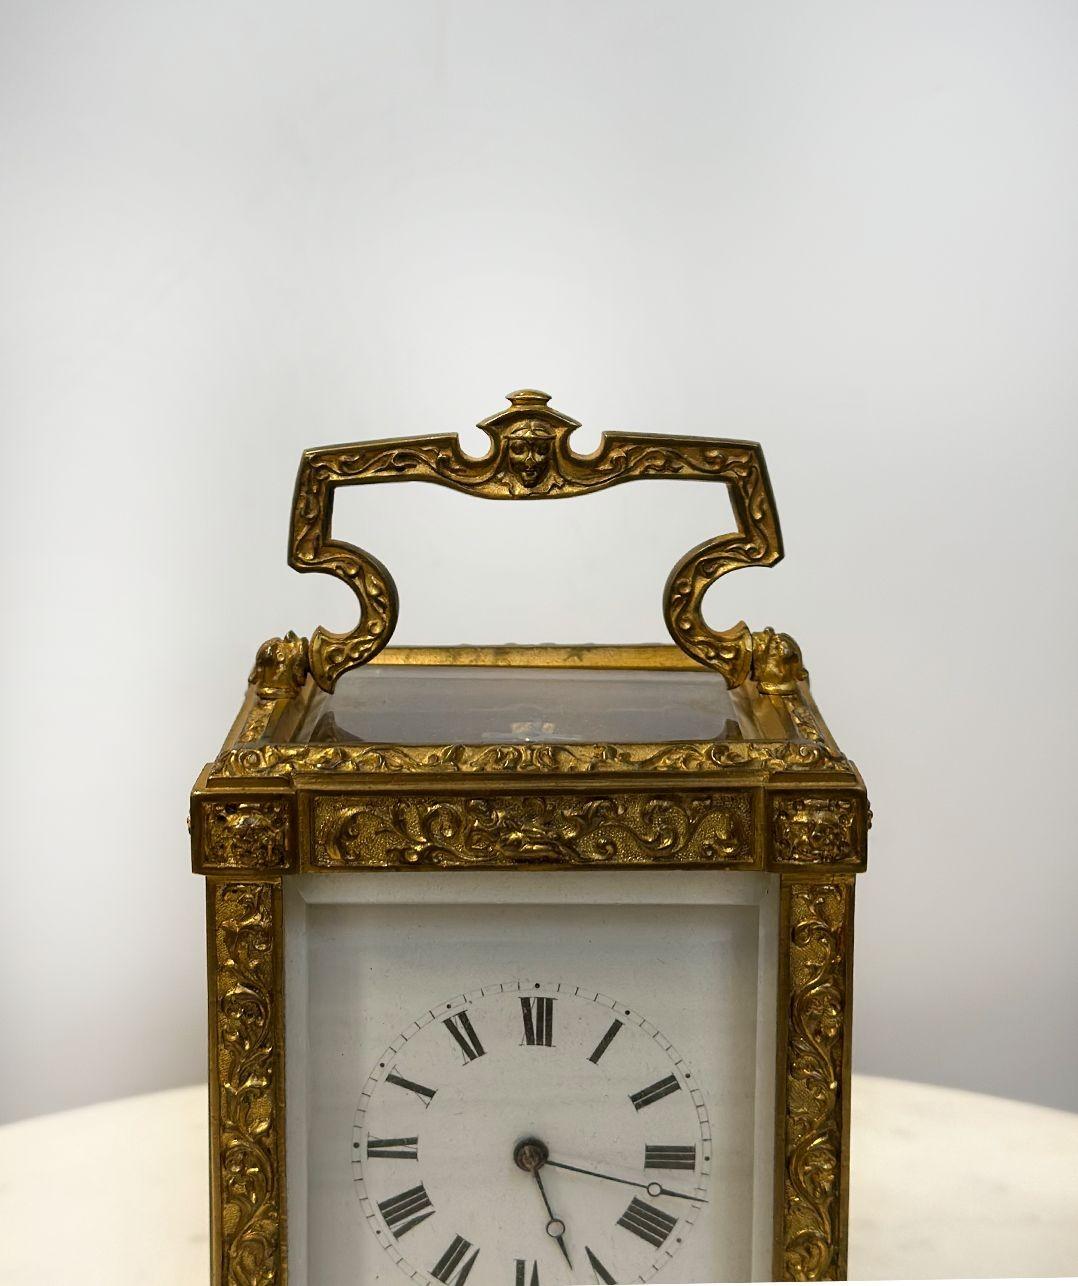 Graceful bronze carriage clock by Jules, Paris, c. 1840 (Late 19th Century), numbered 542 and includes 